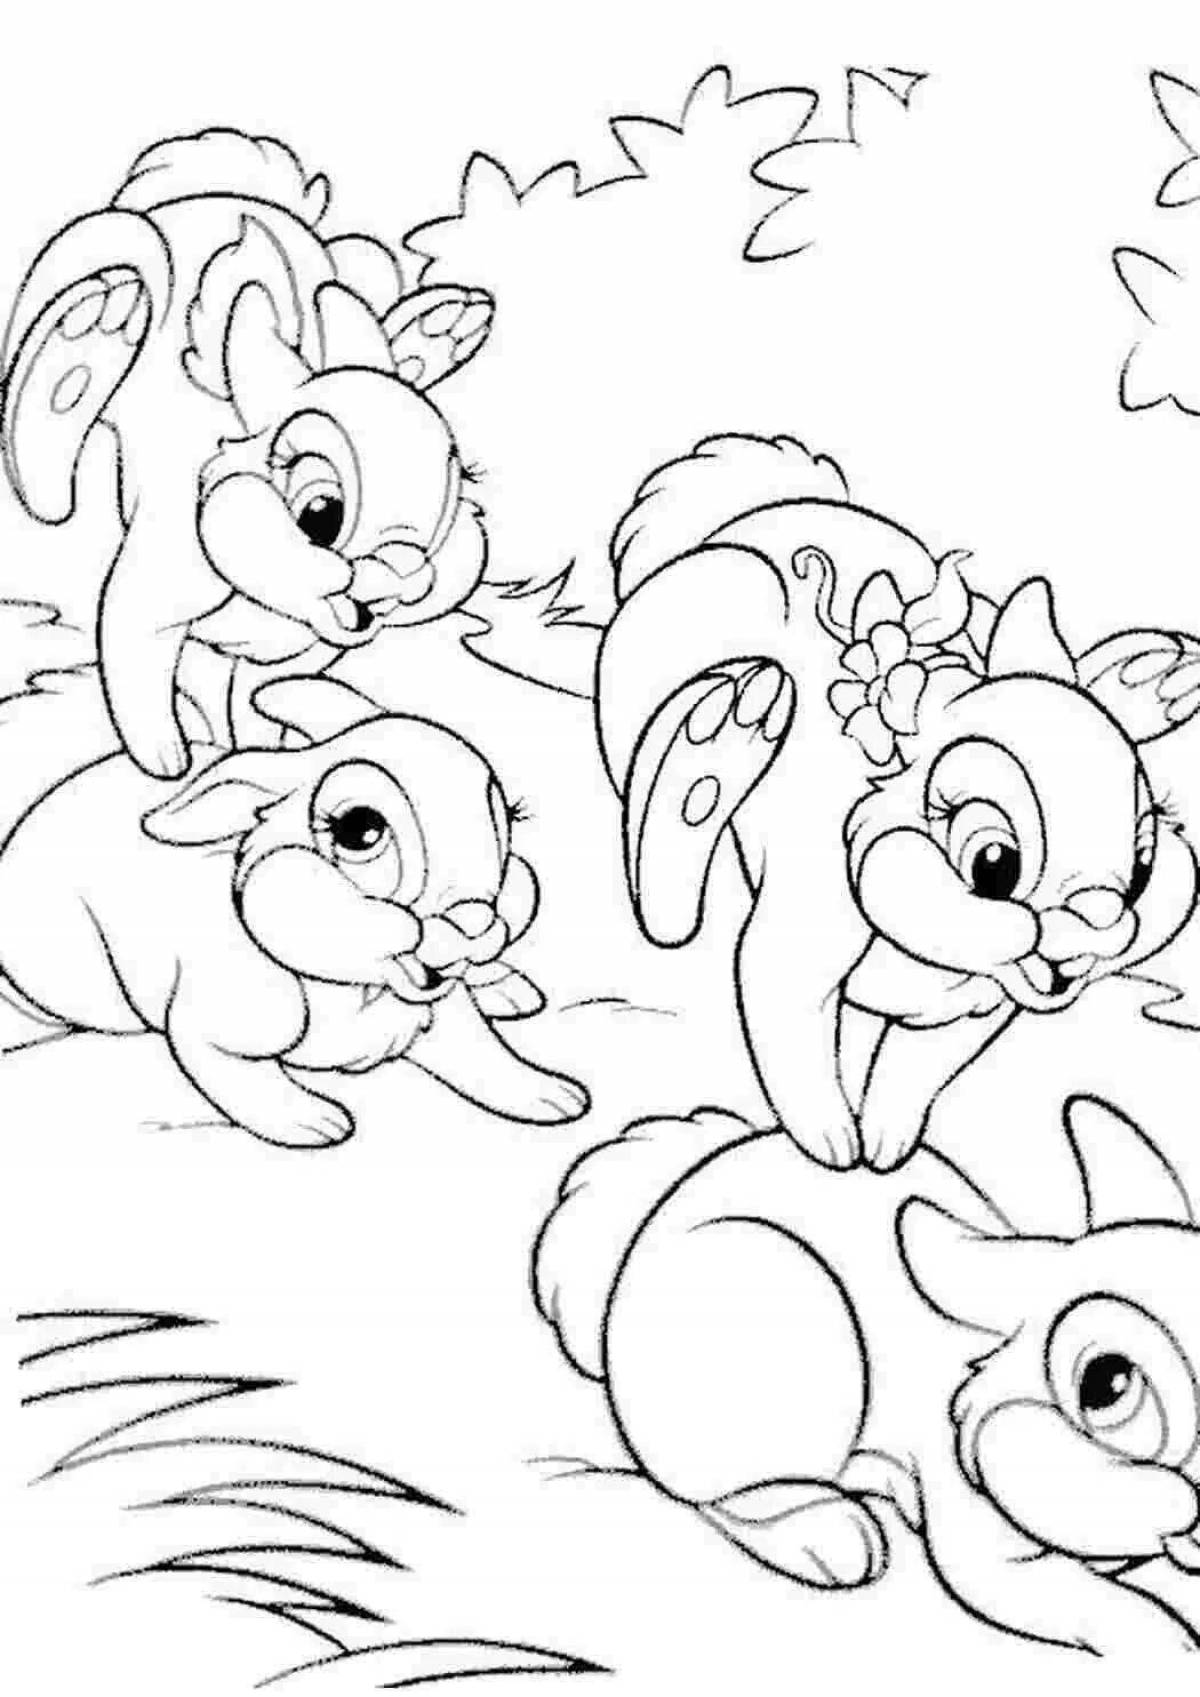 Coloring page funny running hare